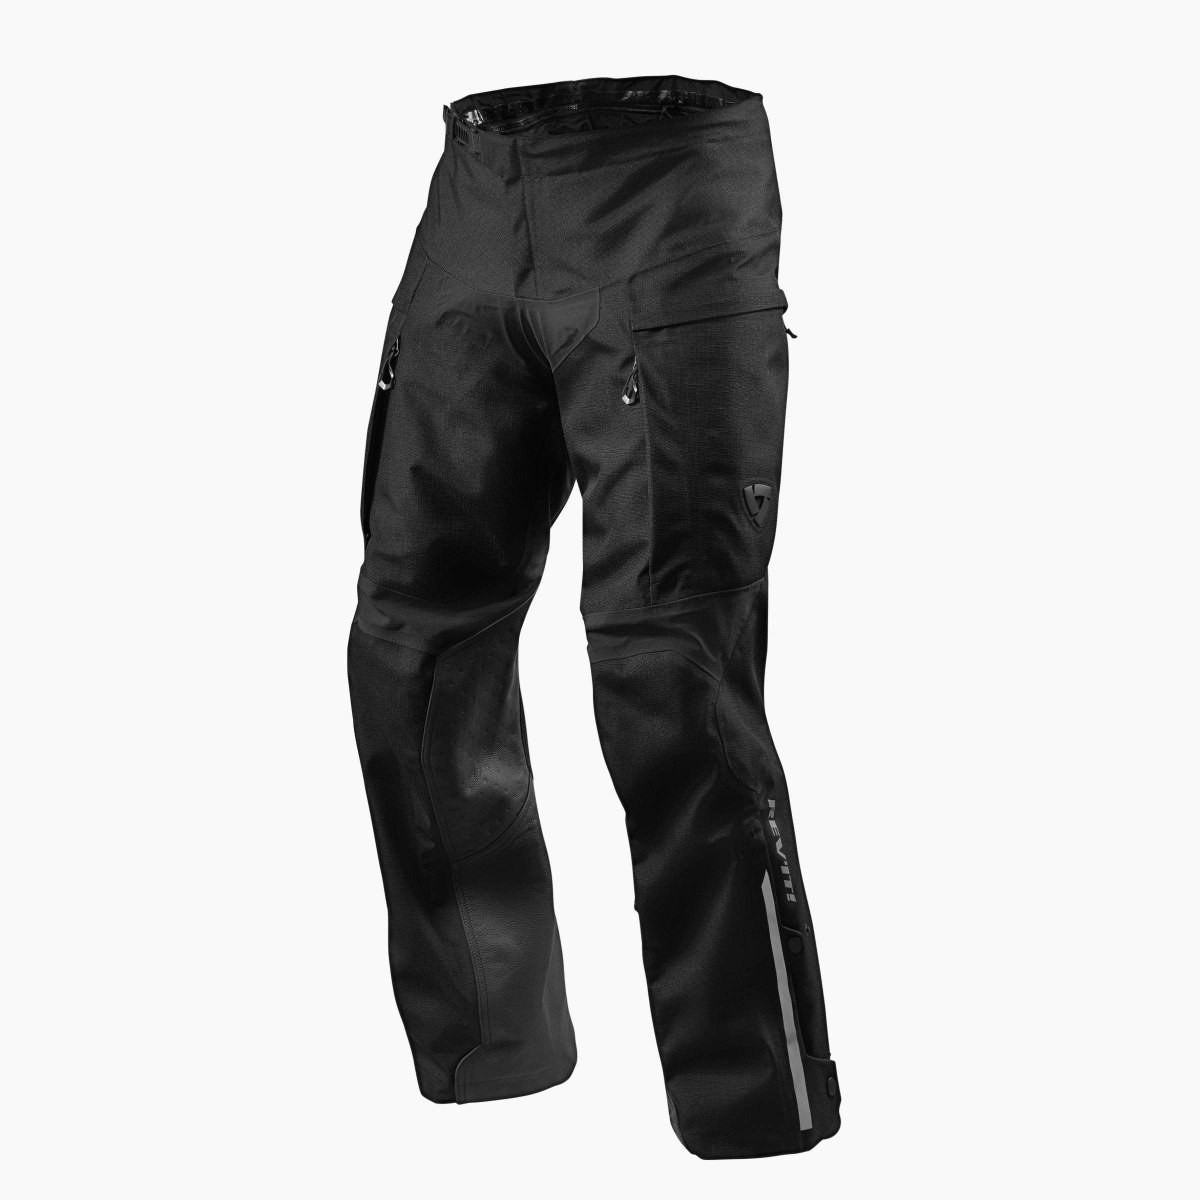 Image of REV'IT! Component H2O Standard Black Motorcycle Pants Talla 4XL